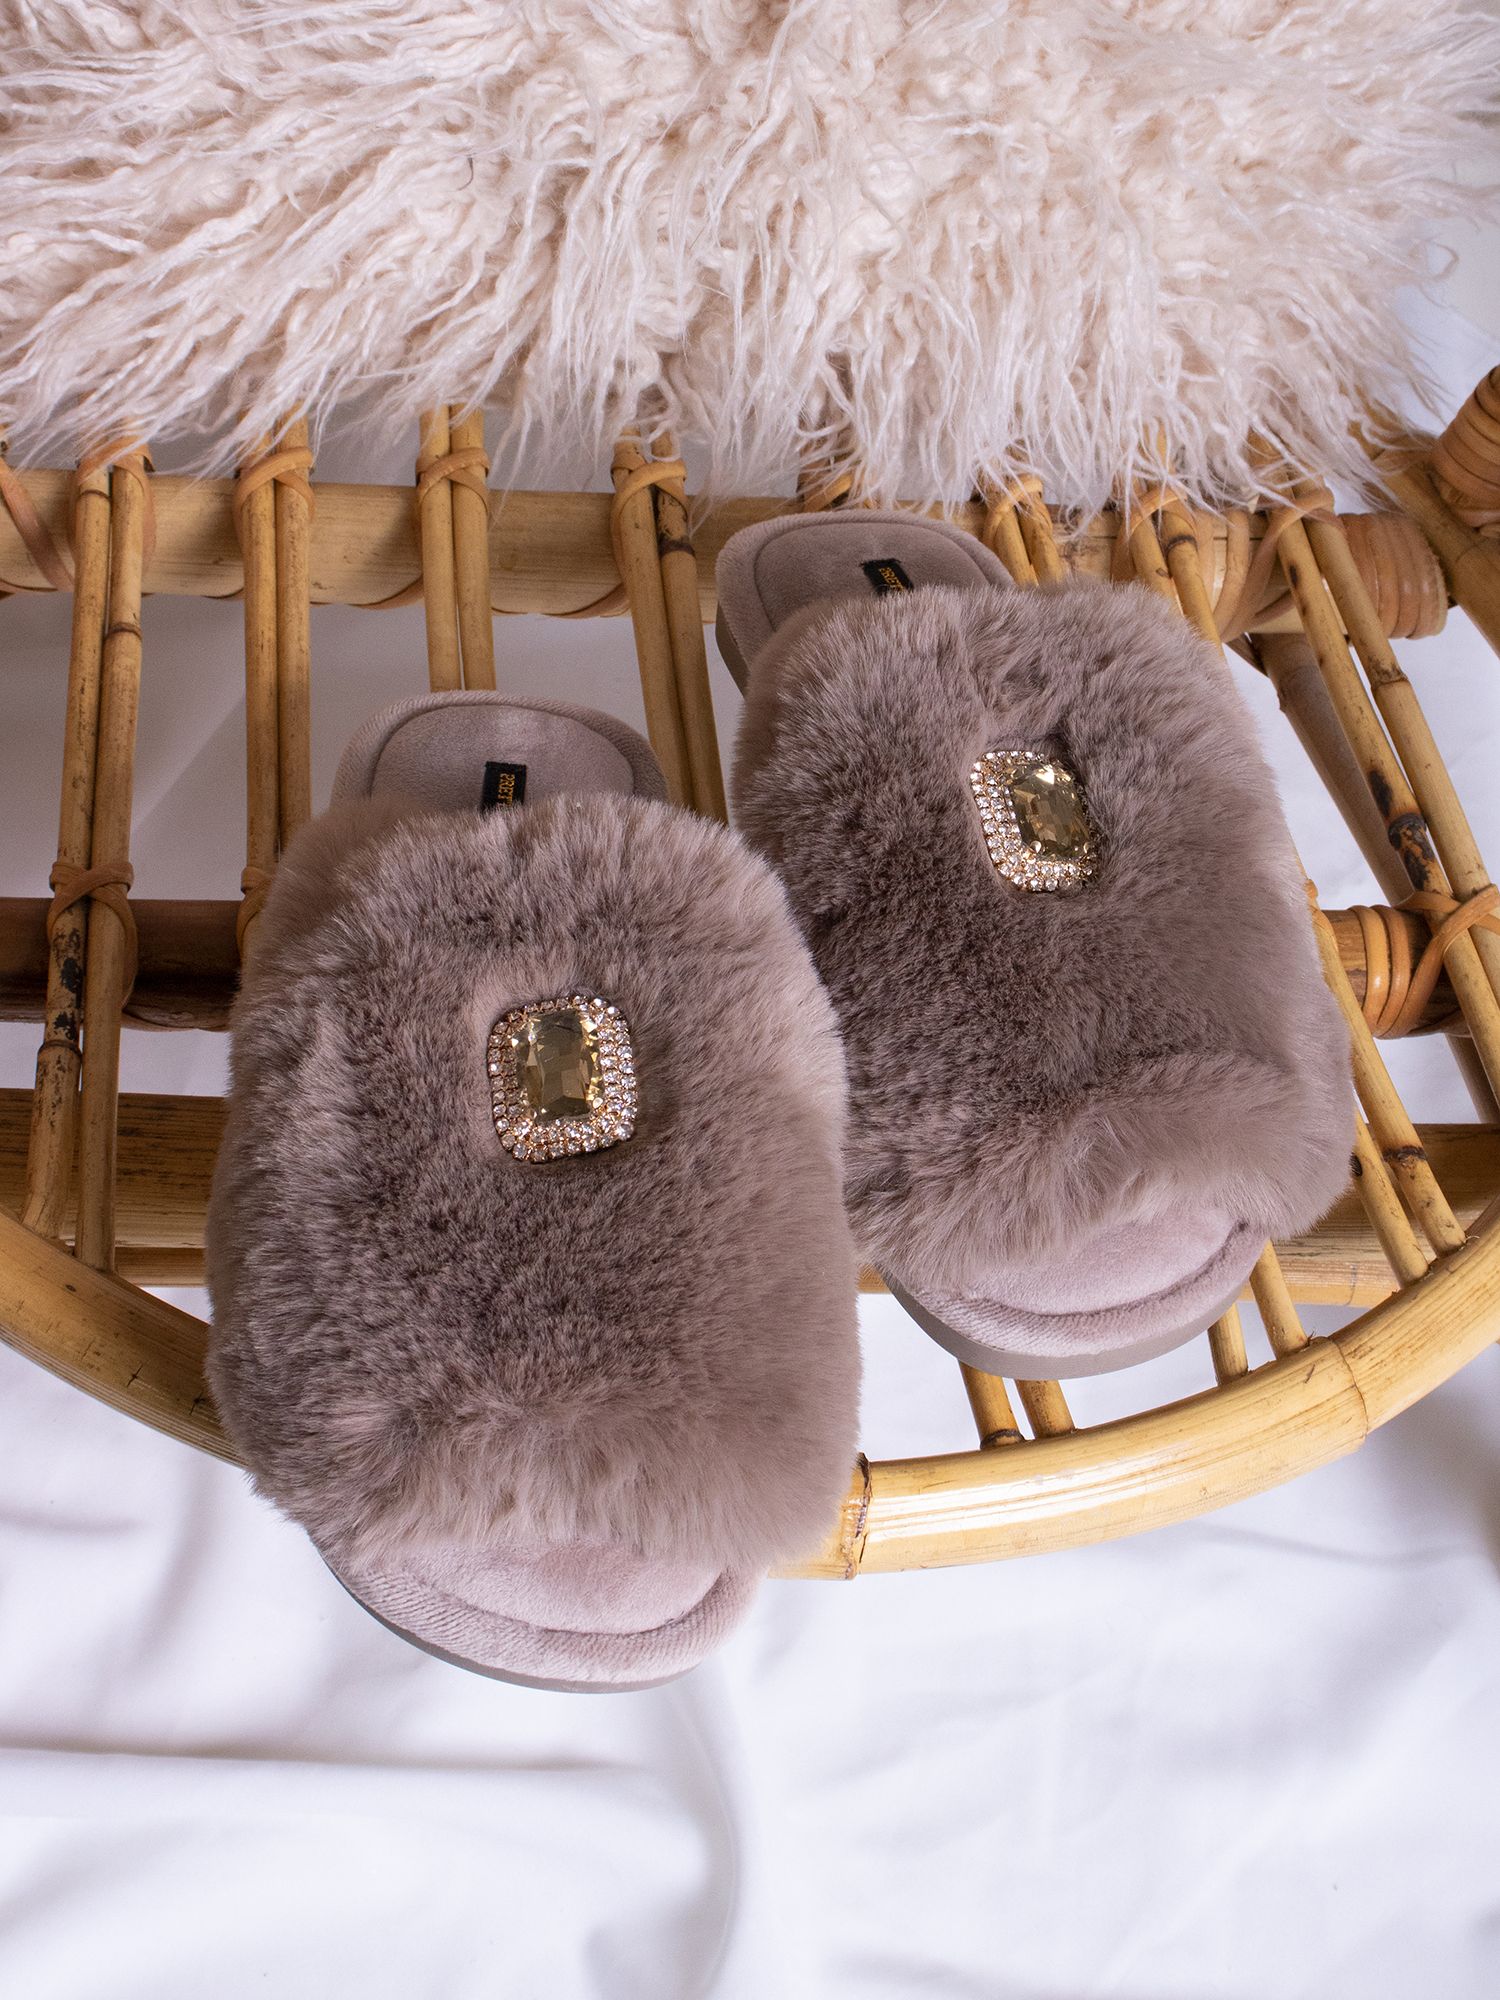 Buy Pretty You London Fifi Slippers Online at johnlewis.com